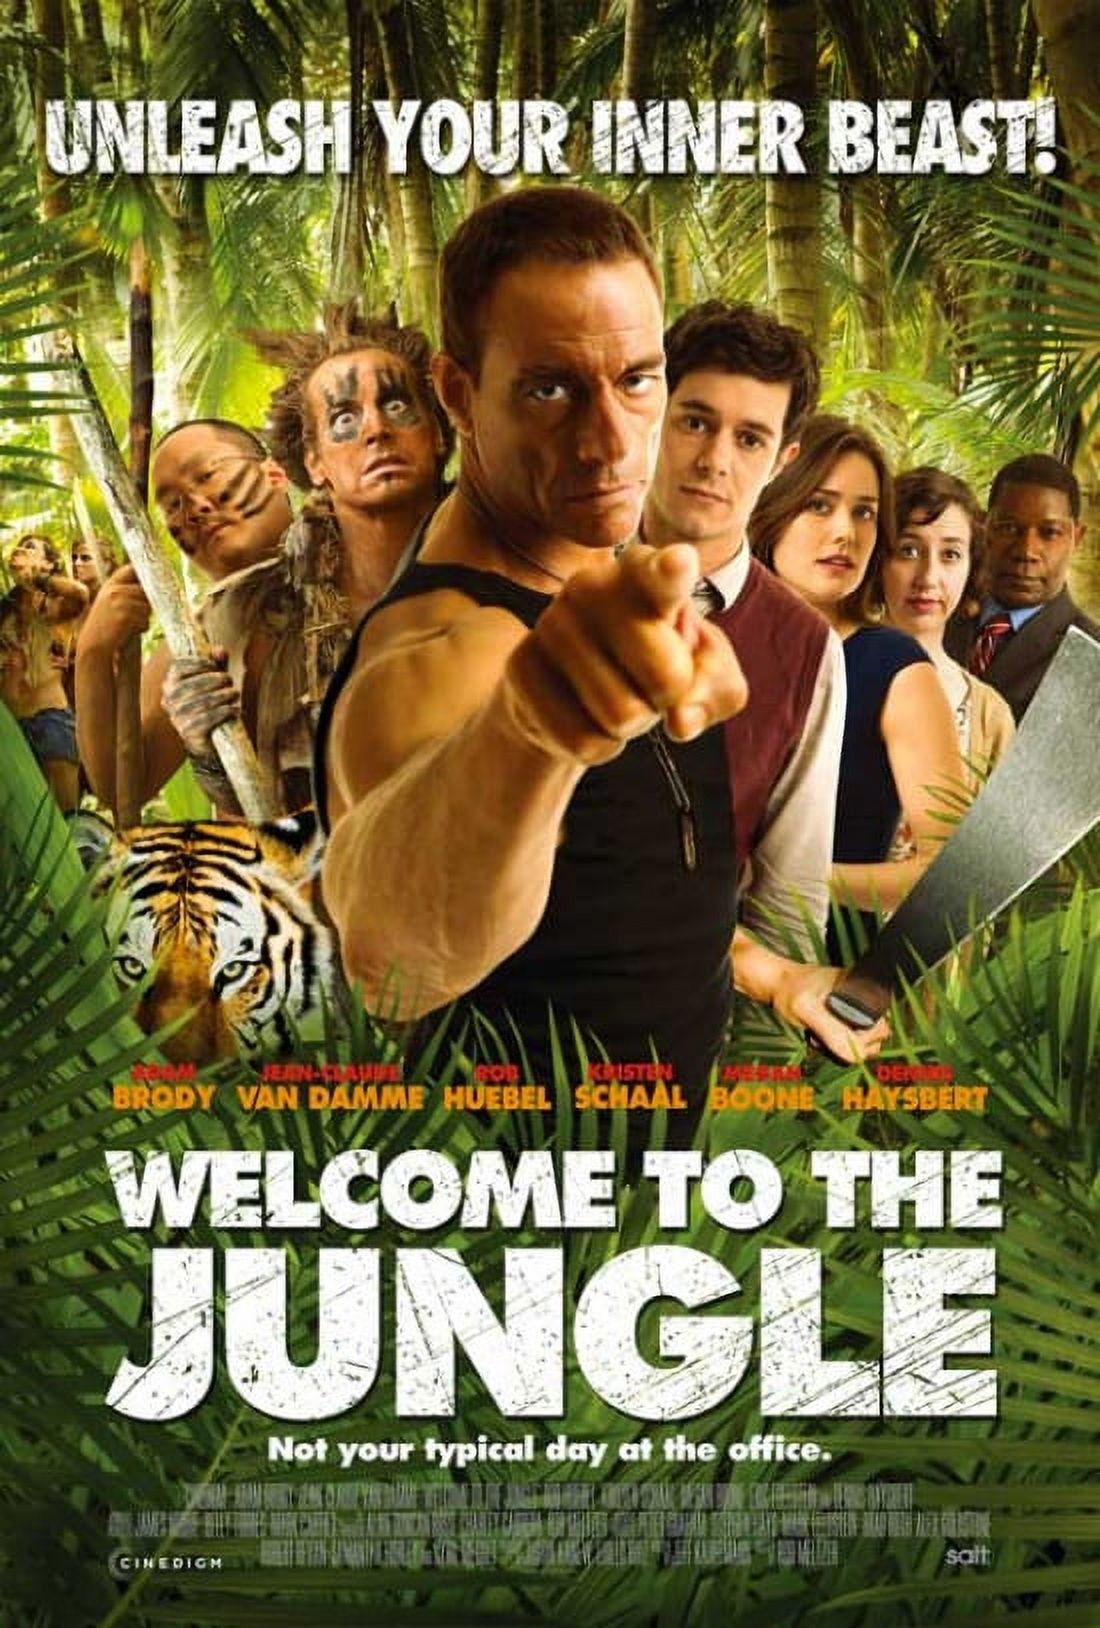 Welcome to the Jungle Movie Poster (11 x 17) - image 1 of 1